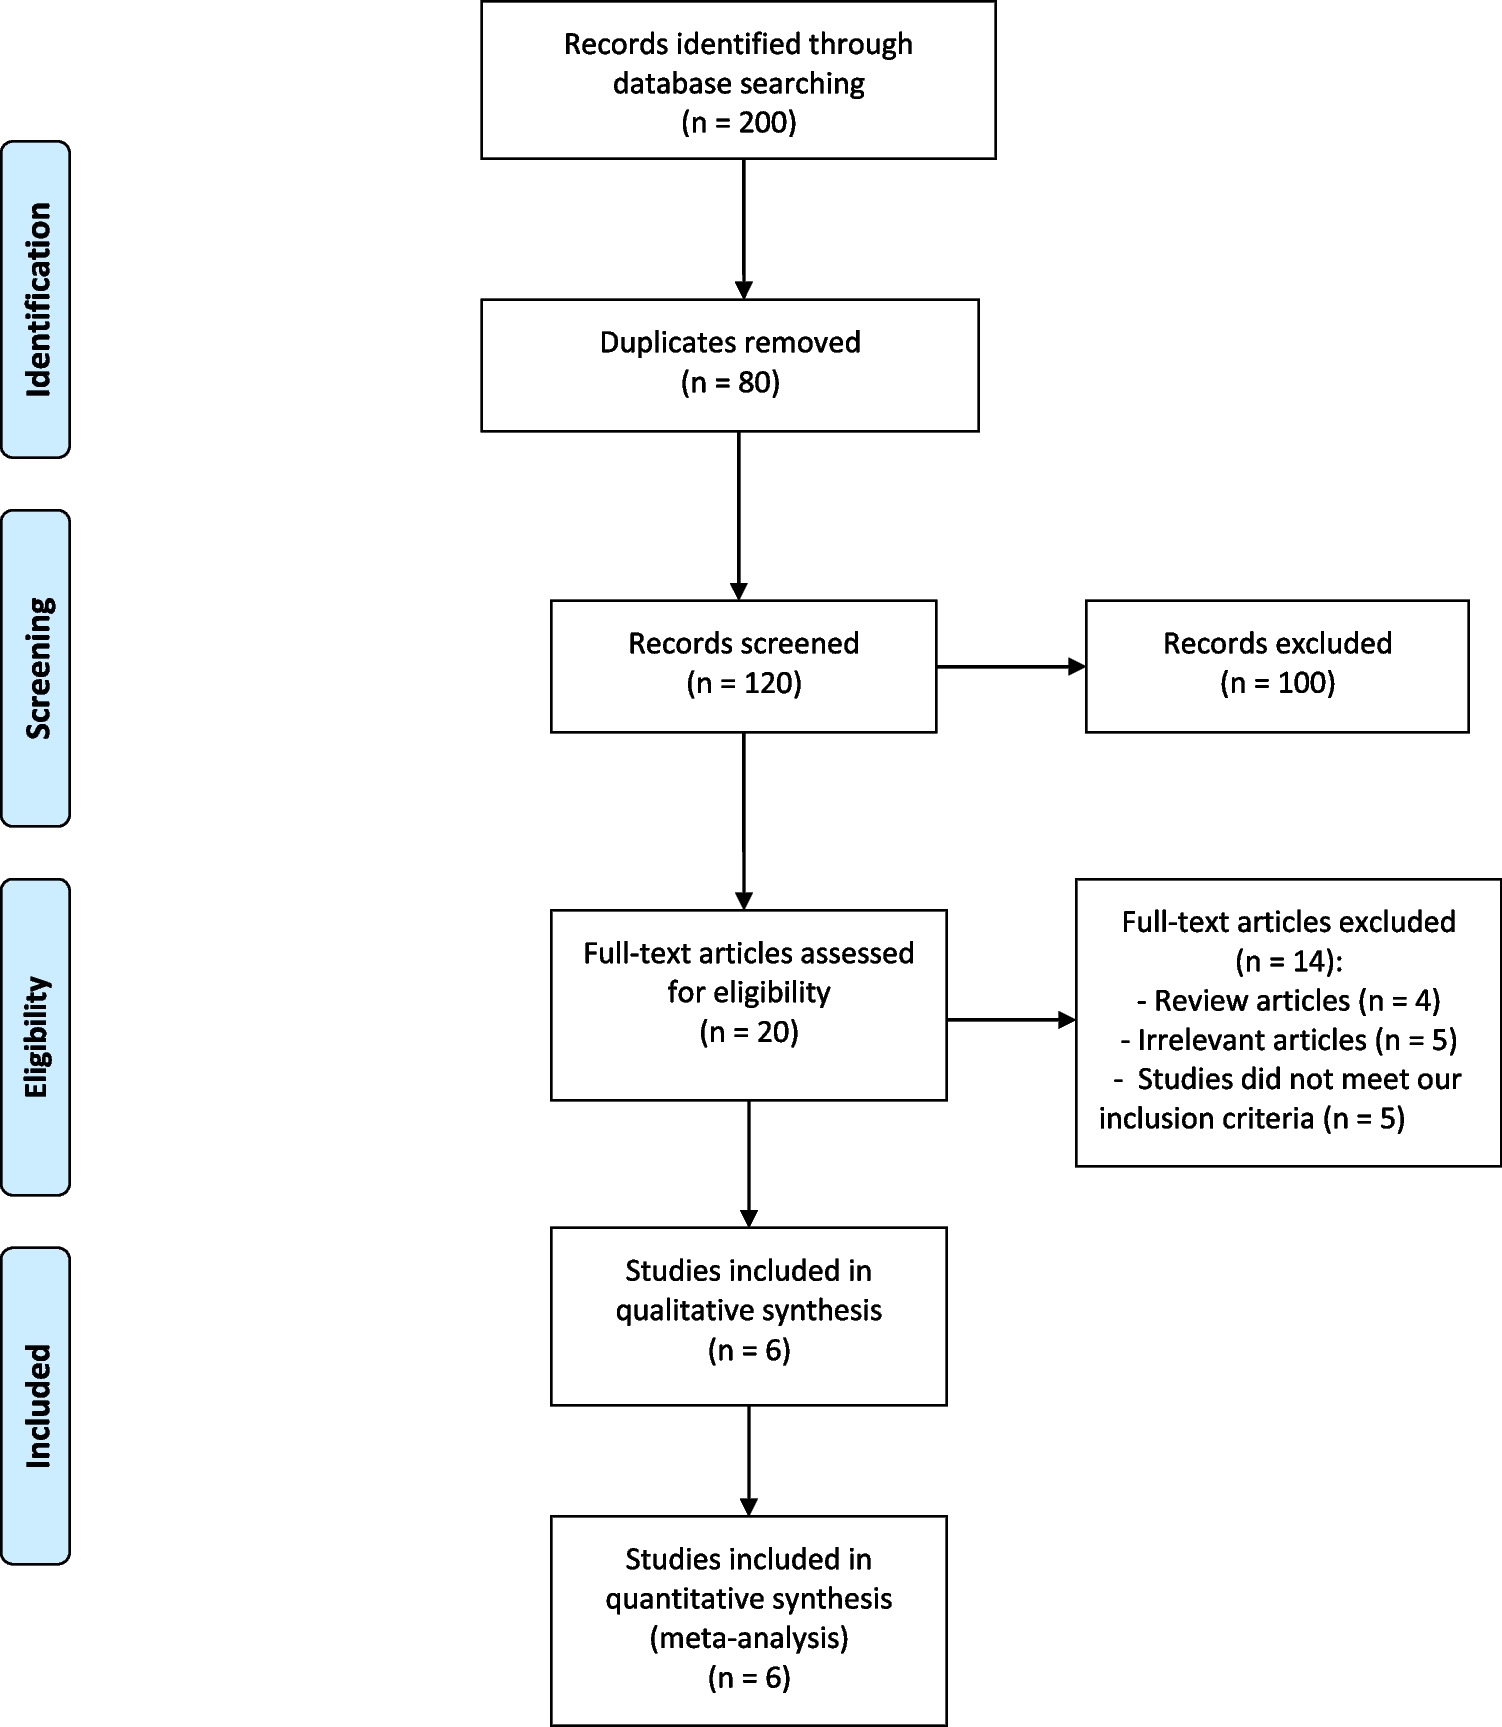 Effects of letrozole alone or in combination with gonadotropins on ovulation induction and clinical pregnancy in women with polycystic ovarian syndrome: a systematic review and meta-analysis of randomized controlled trials